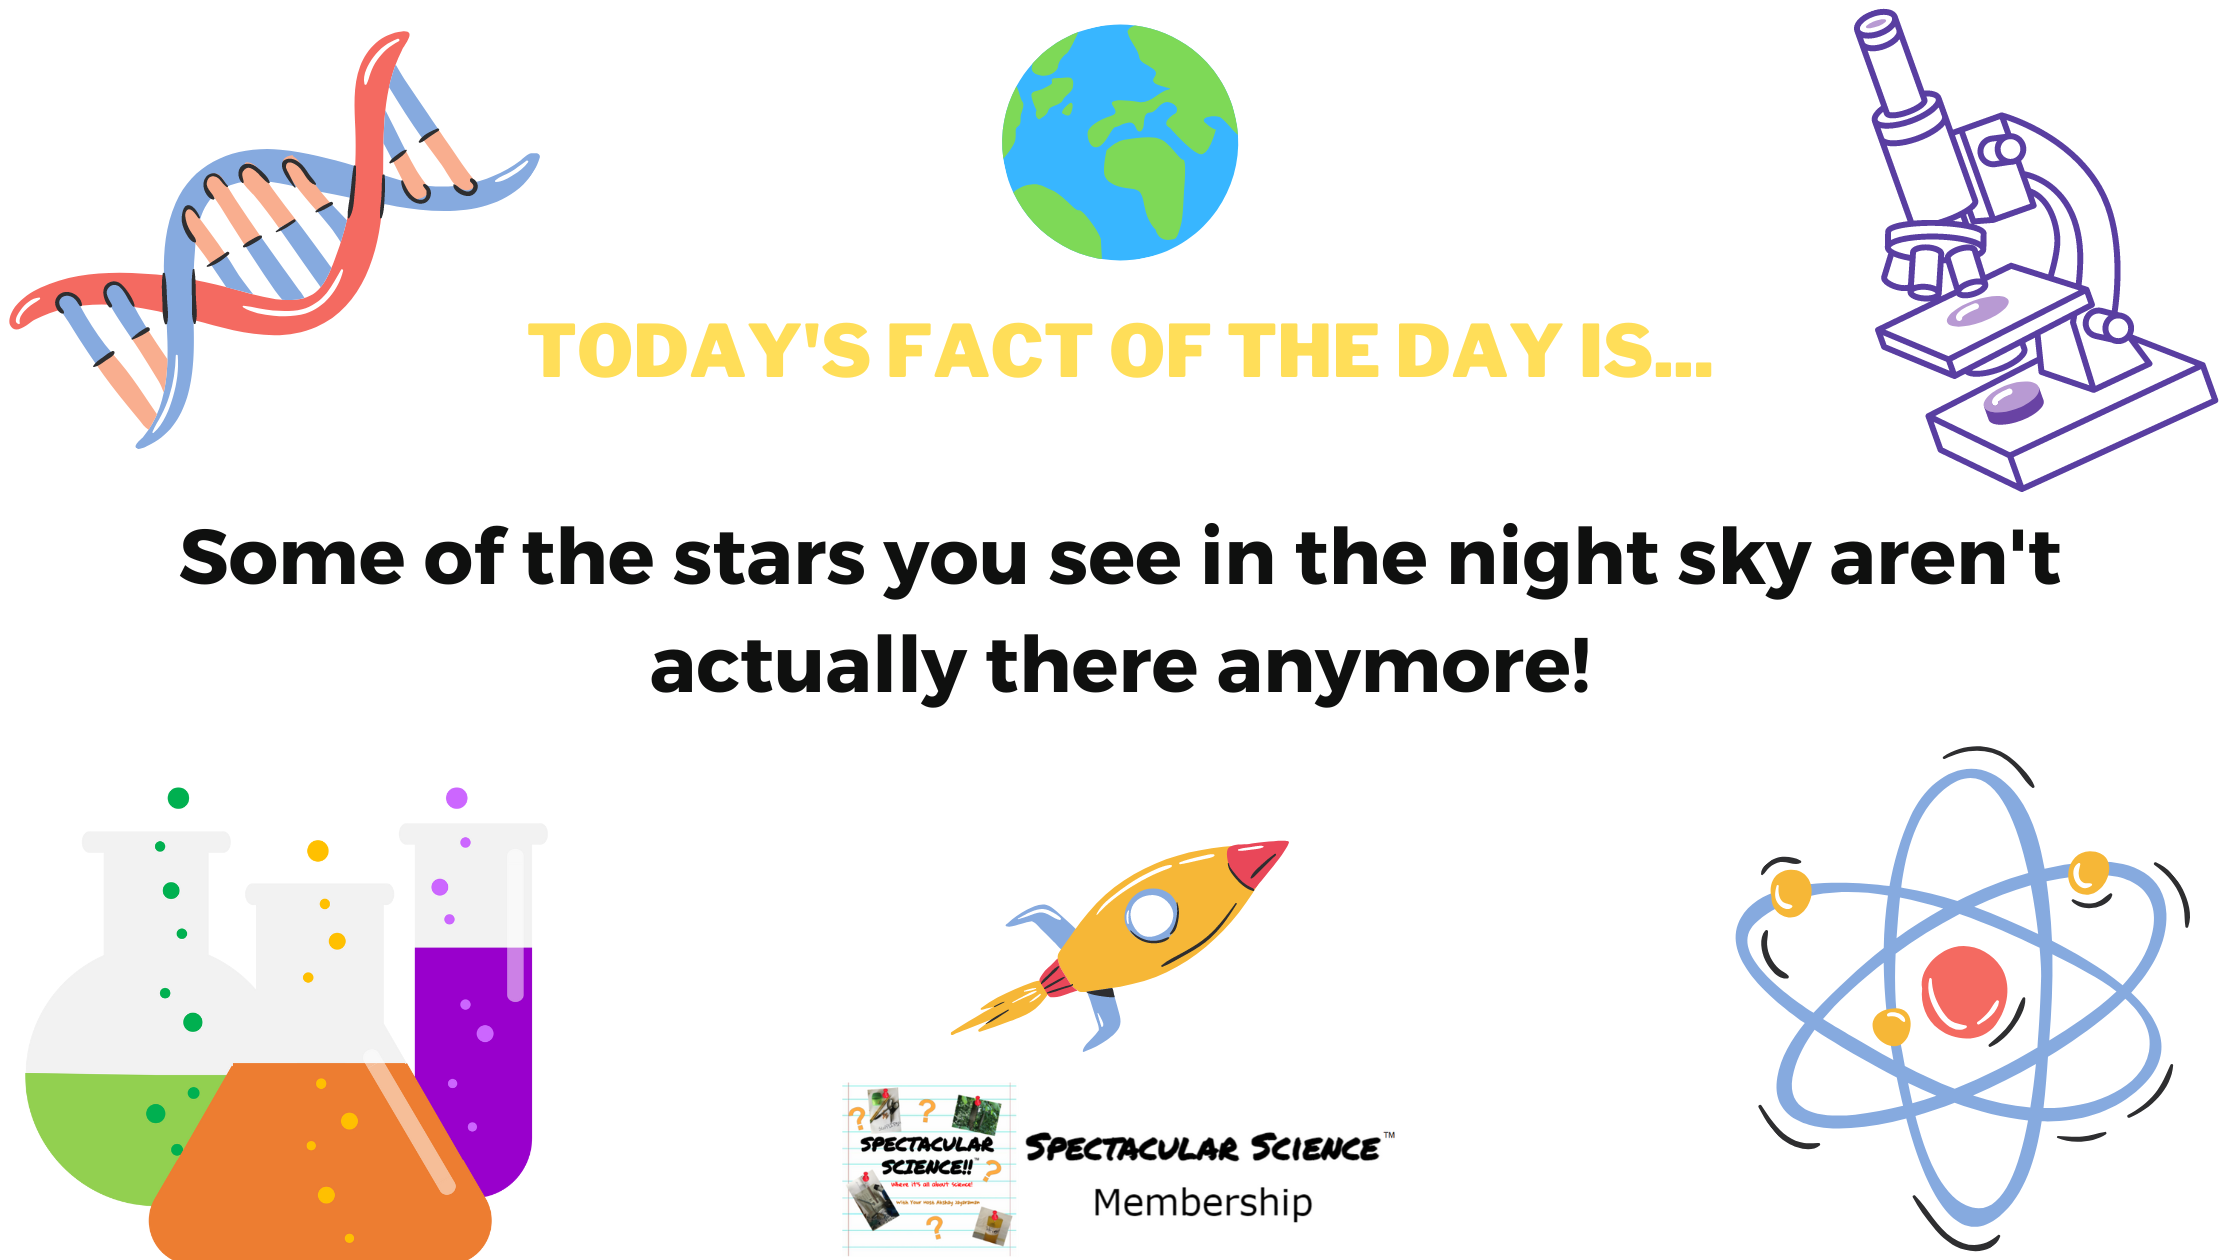 Fact of the Day Image August 2nd